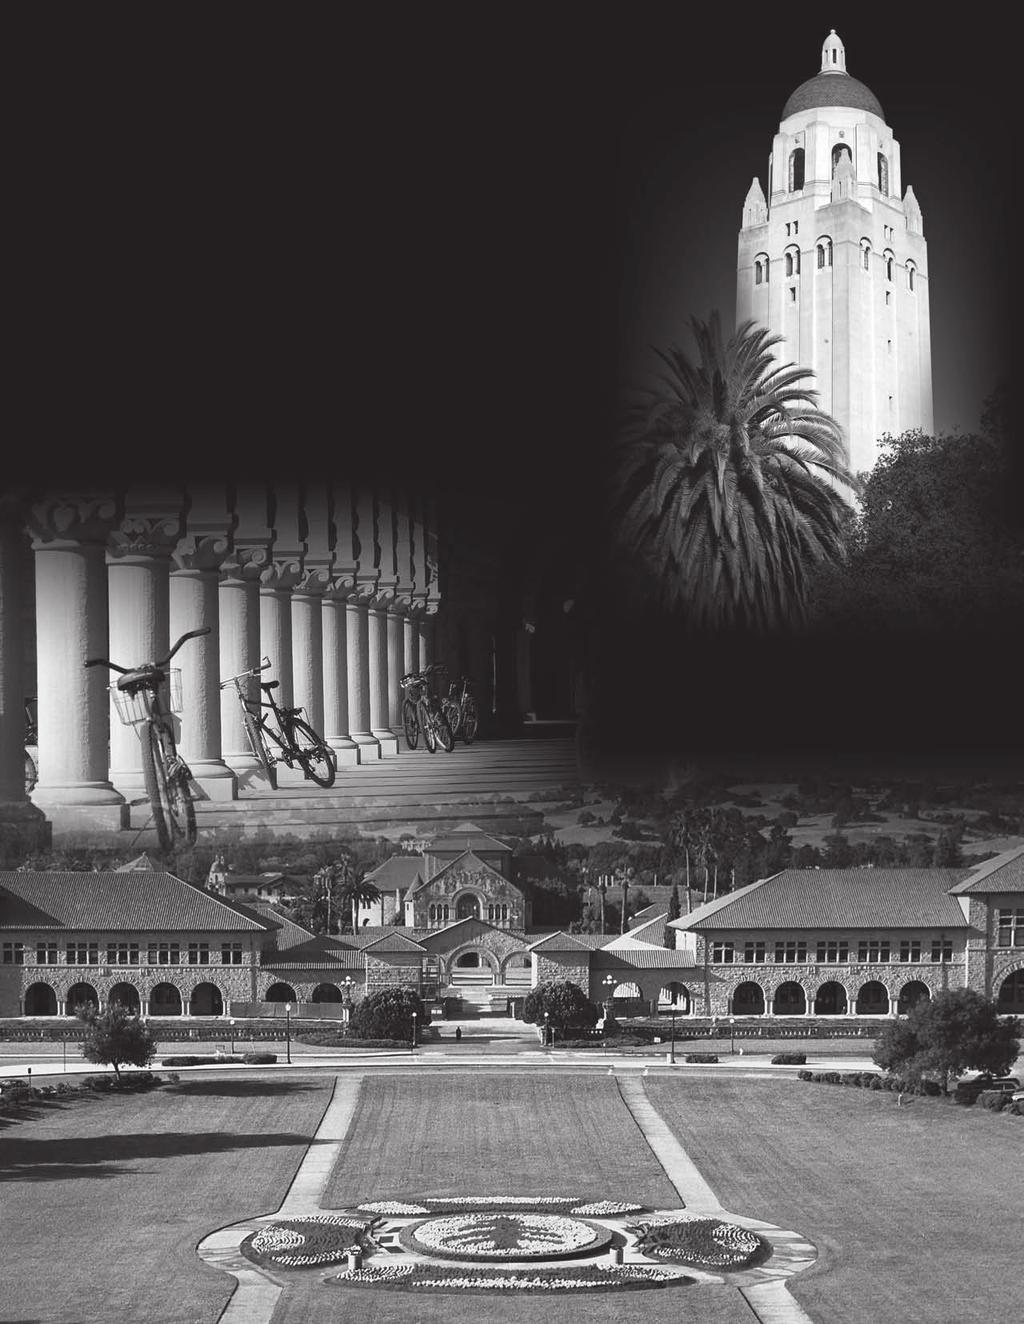 STANFORD UNIVERSITY THE NATION S PREMIER UNIVERSITY The world all at once: Limitless possibilities are at the heart of Stanford University.